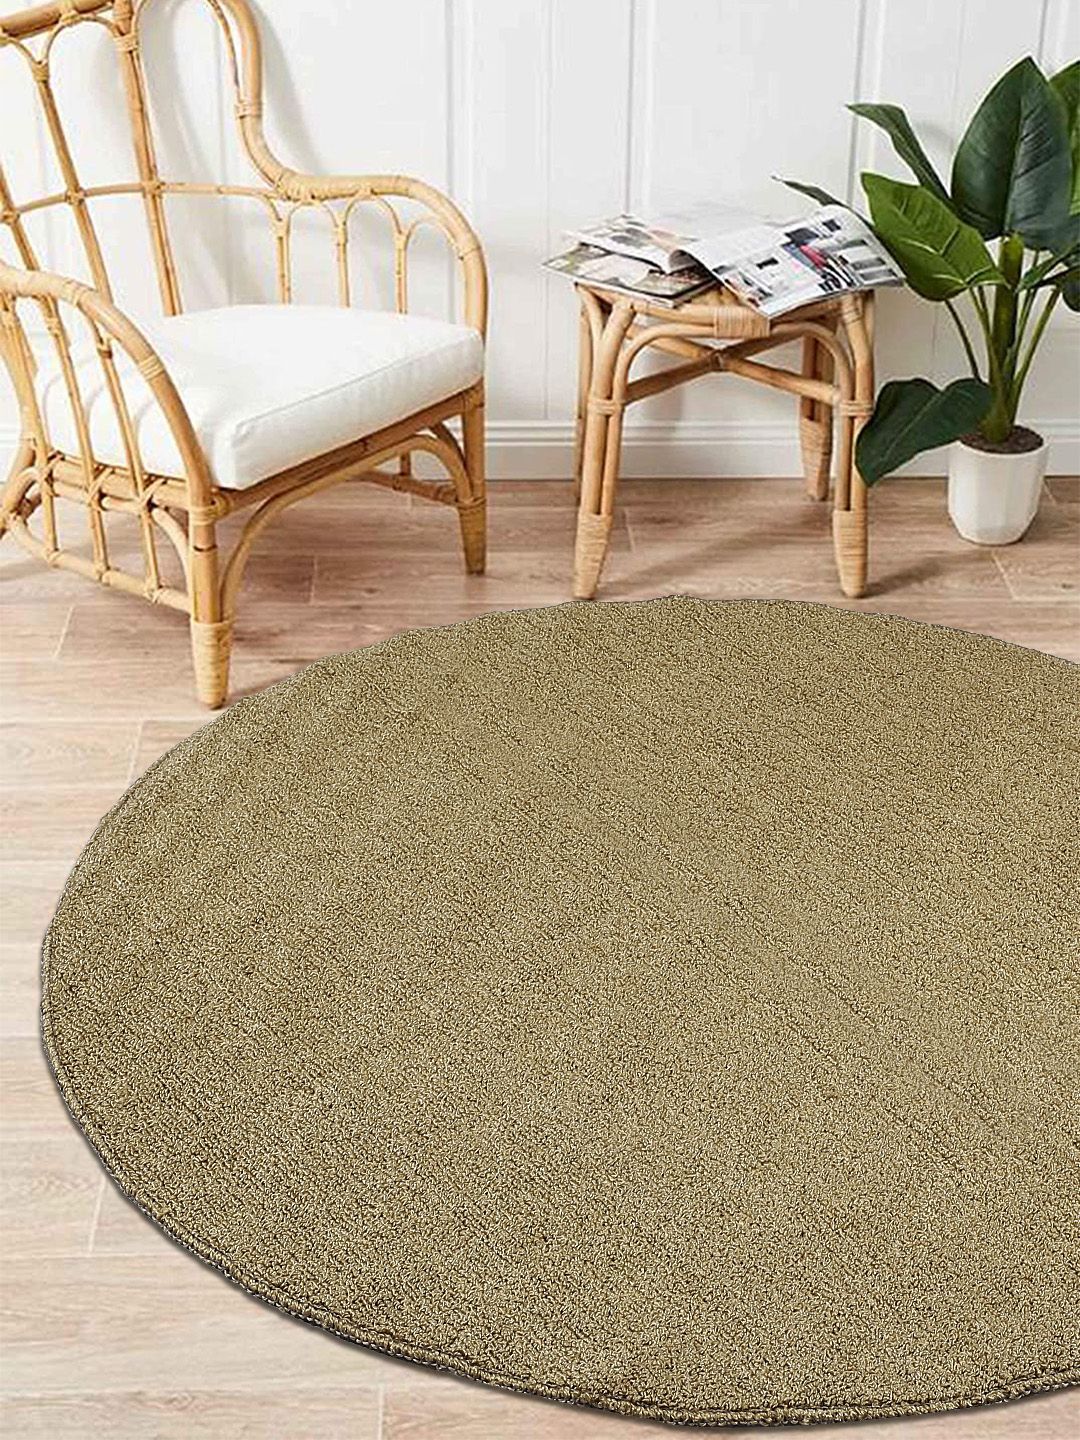 Saral Home Gold-Coloured Solid PP-Yarn Round Anti-Skid Multi-Use Floor Mat Price in India